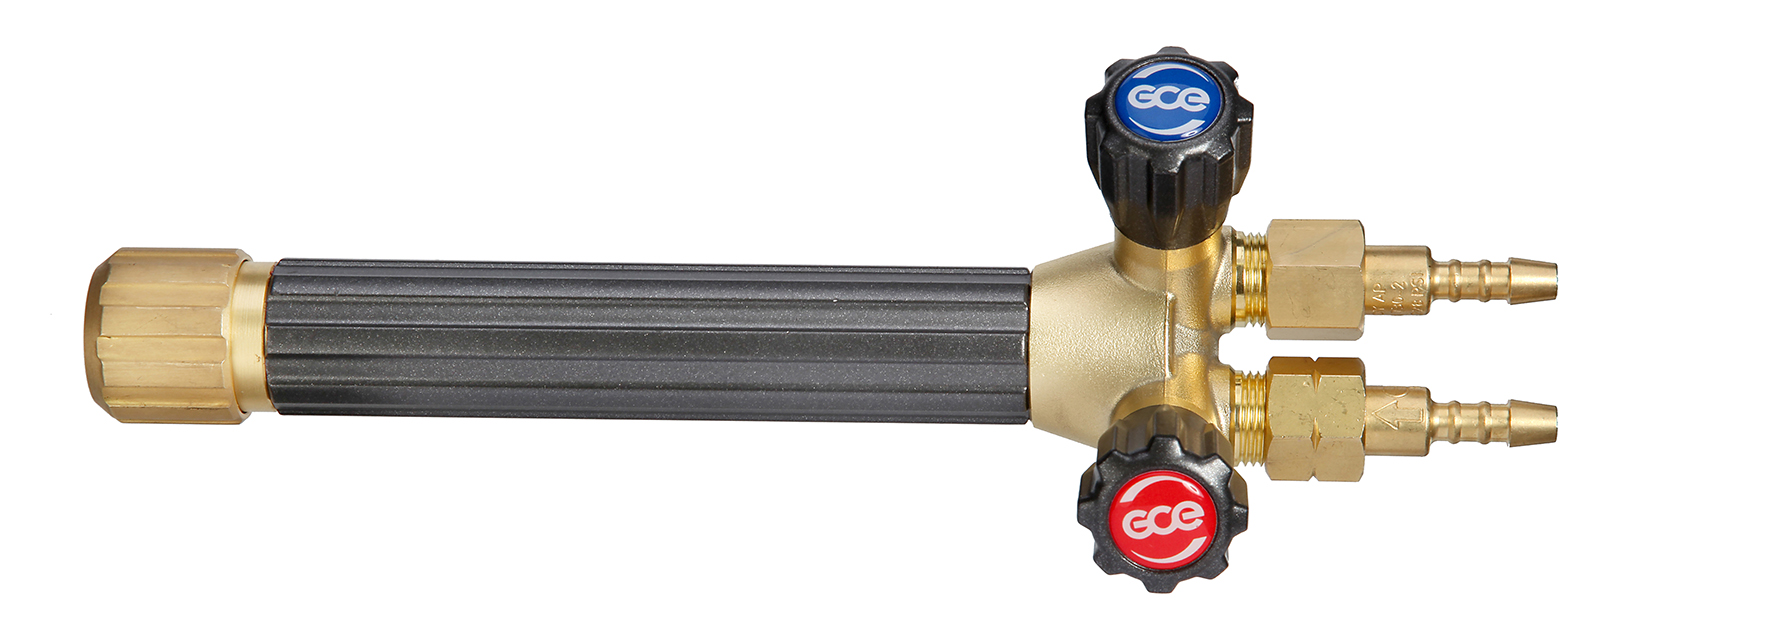 X21® ORIGINAL from GCE Group, leading manufacturer of gas flow control  equipment - GCE Group